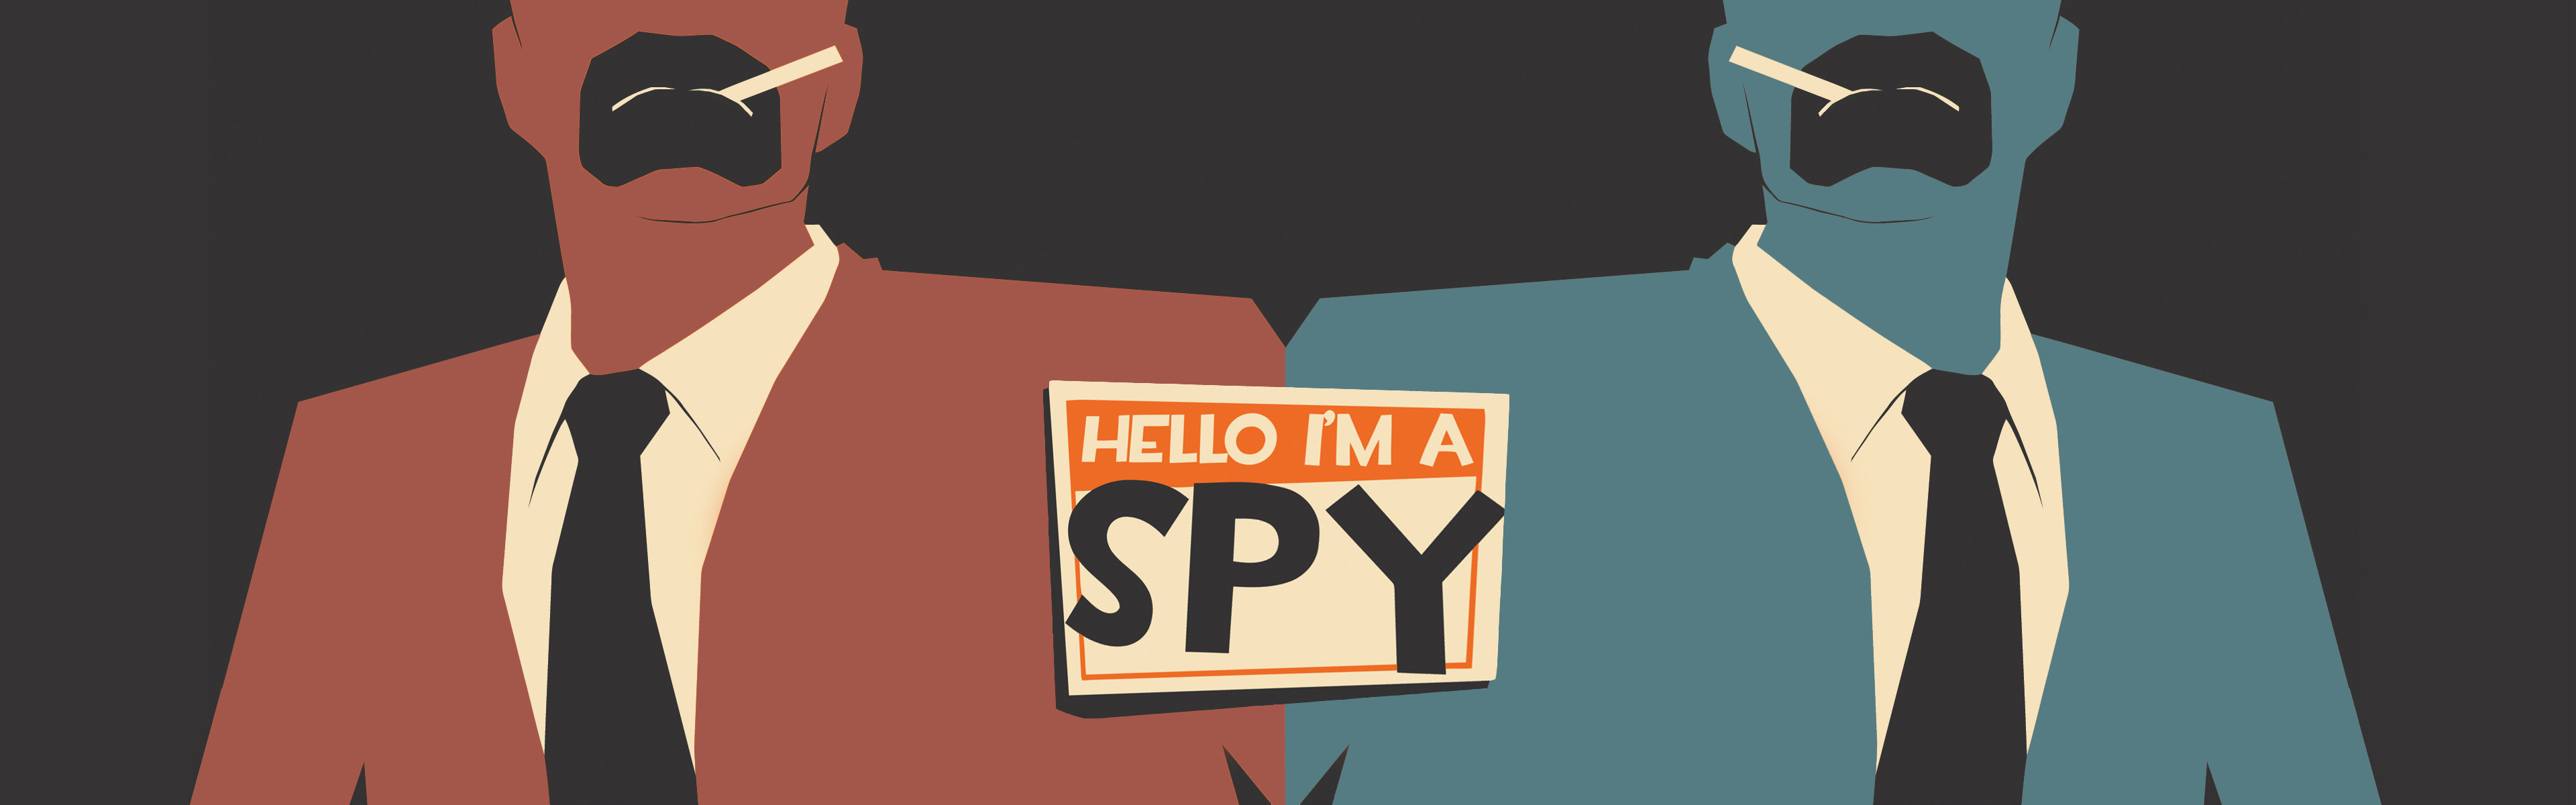 3840x1200 Wallpaper Team Fortress Spy TF Spycrab Spy images for